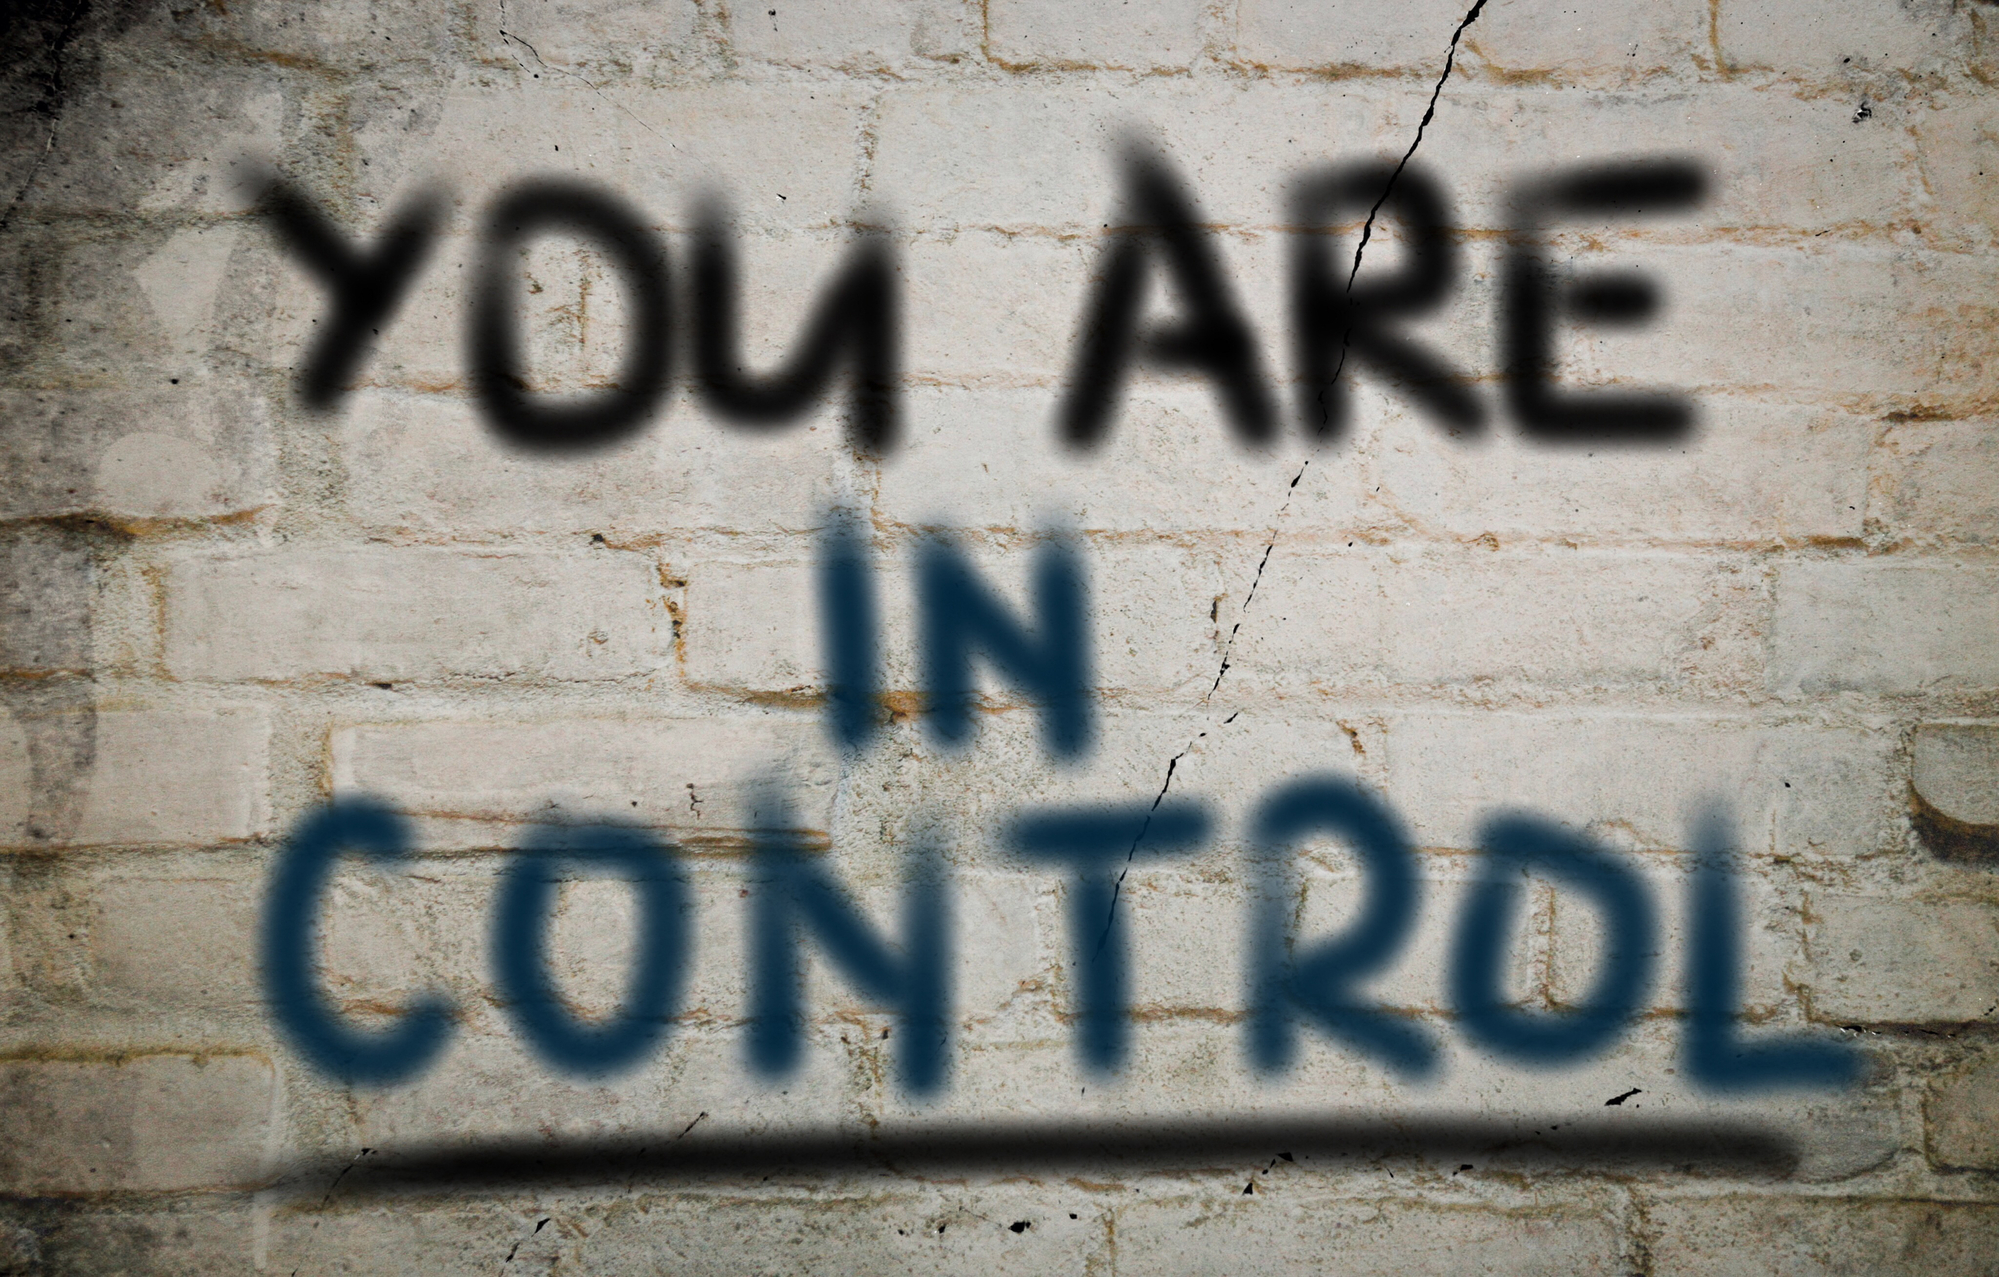 You are in control!